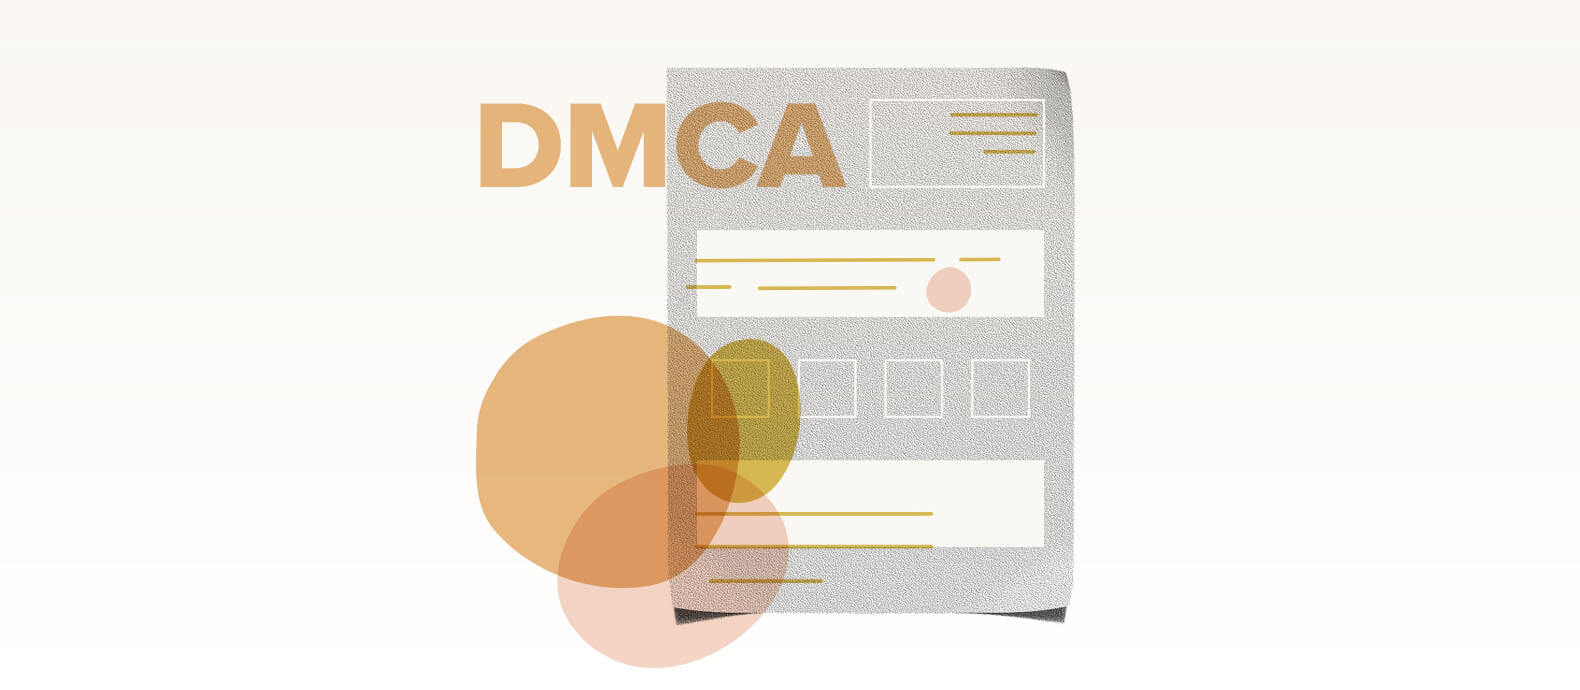 How do I file a DMCA takedown for infringement of online copyright?